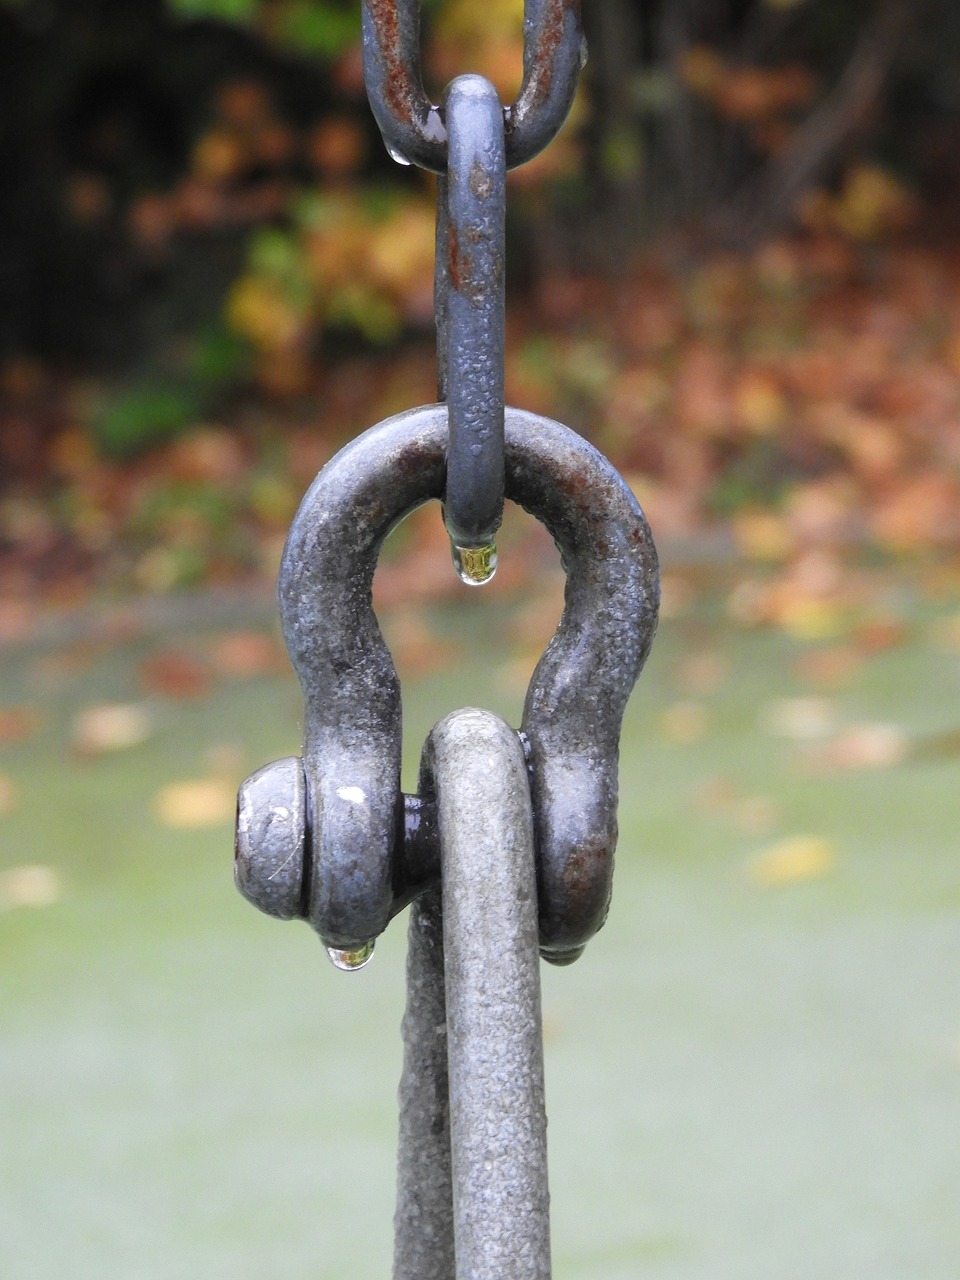 chain shackle water drops free photo